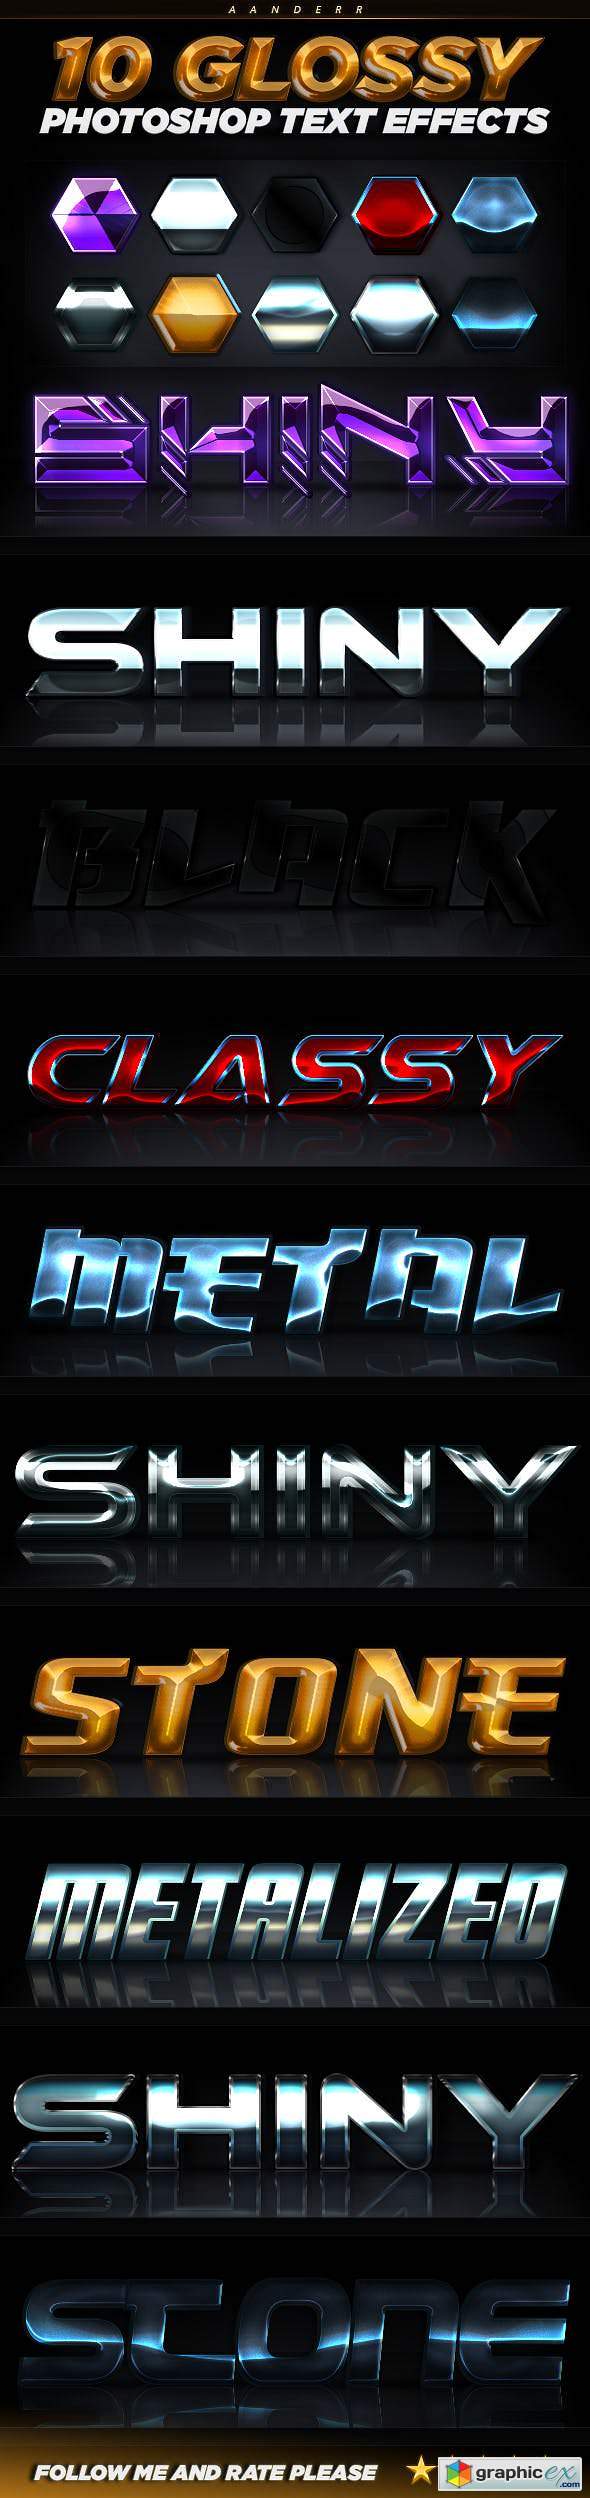 10 Glossy Photoshop Text Effects